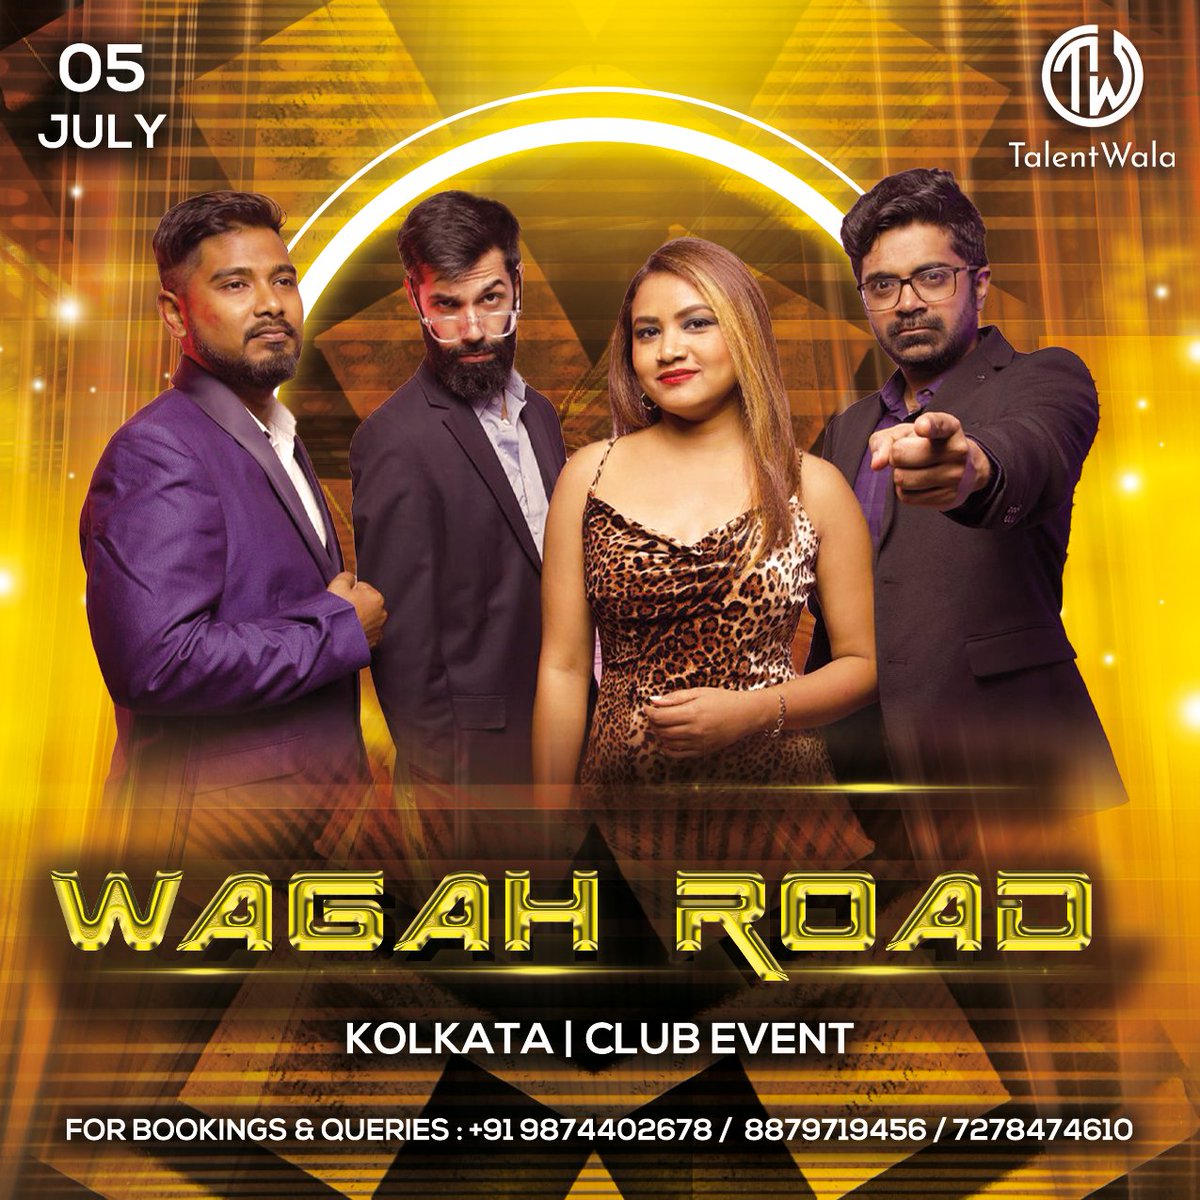 Sound checked✅ Lights checked✅ Are you ready❓
.
WAGAH Road is gearing up for the most exciting 🔥club event in Kolkata.
.
#rockband #rockmusic #rocksong #kolkataevents #nightlife #bandmanagement #talentwala